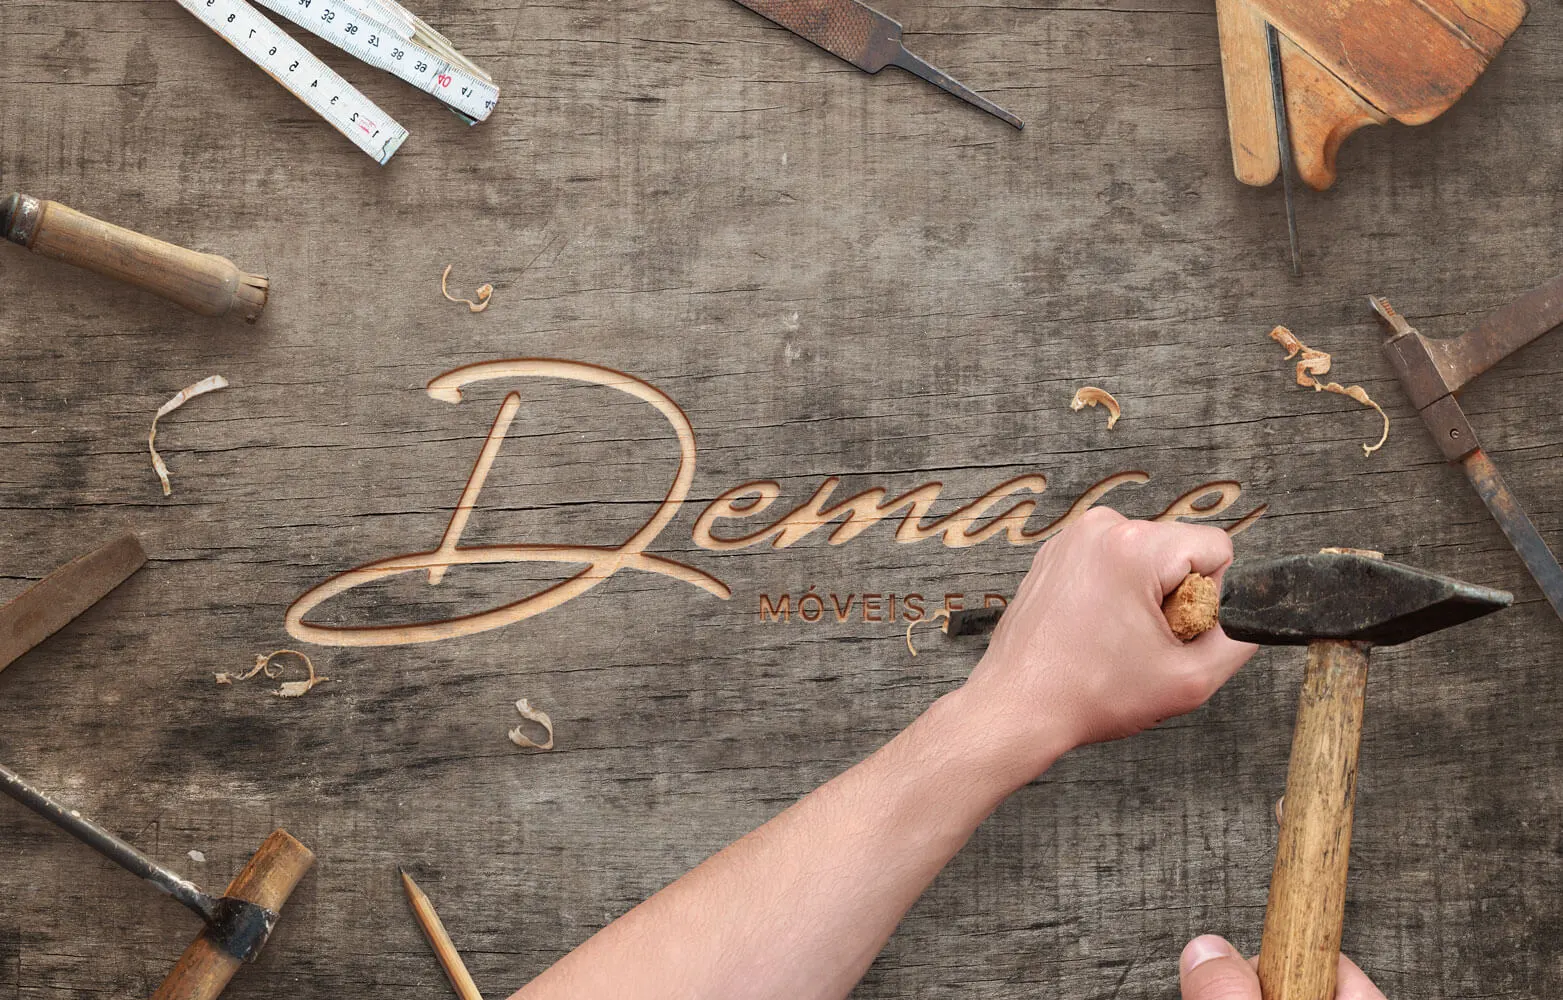 Demace Furniture and Decor